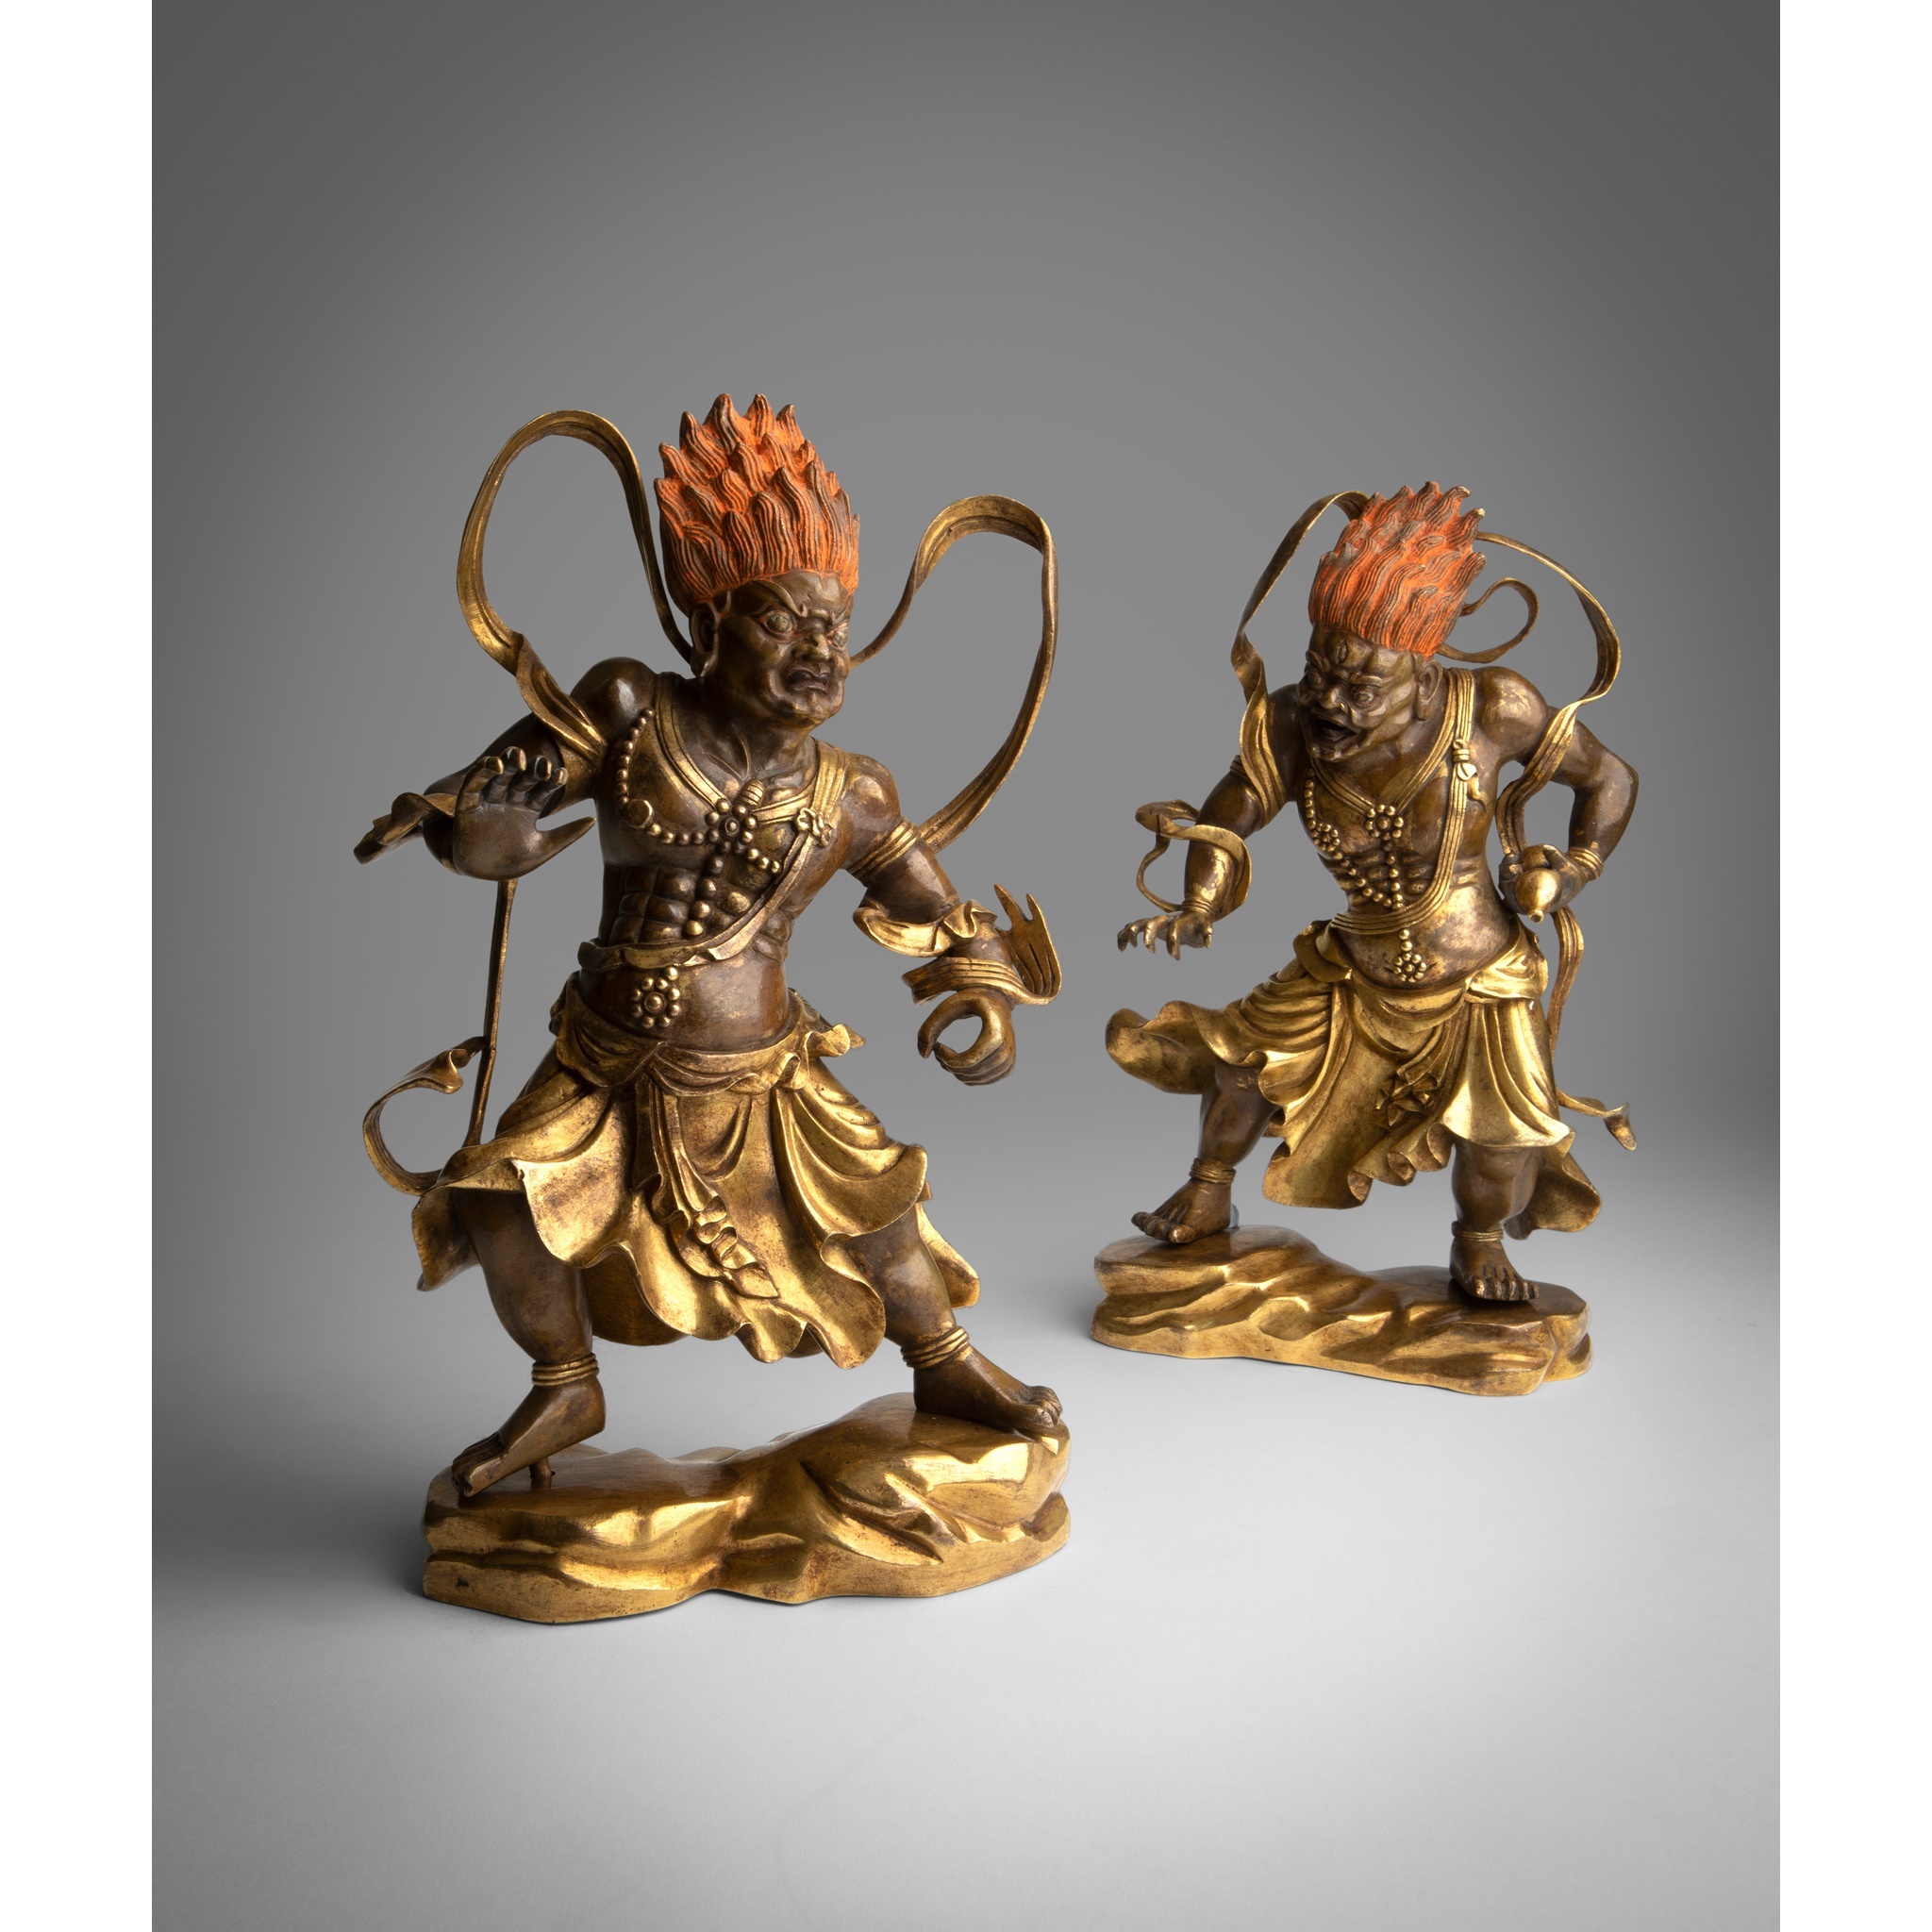 PAIR OF GILT BRONZE FIGURE OF TEMPLE GUARDIANS QING DYNASTY, 18TH CENTURY